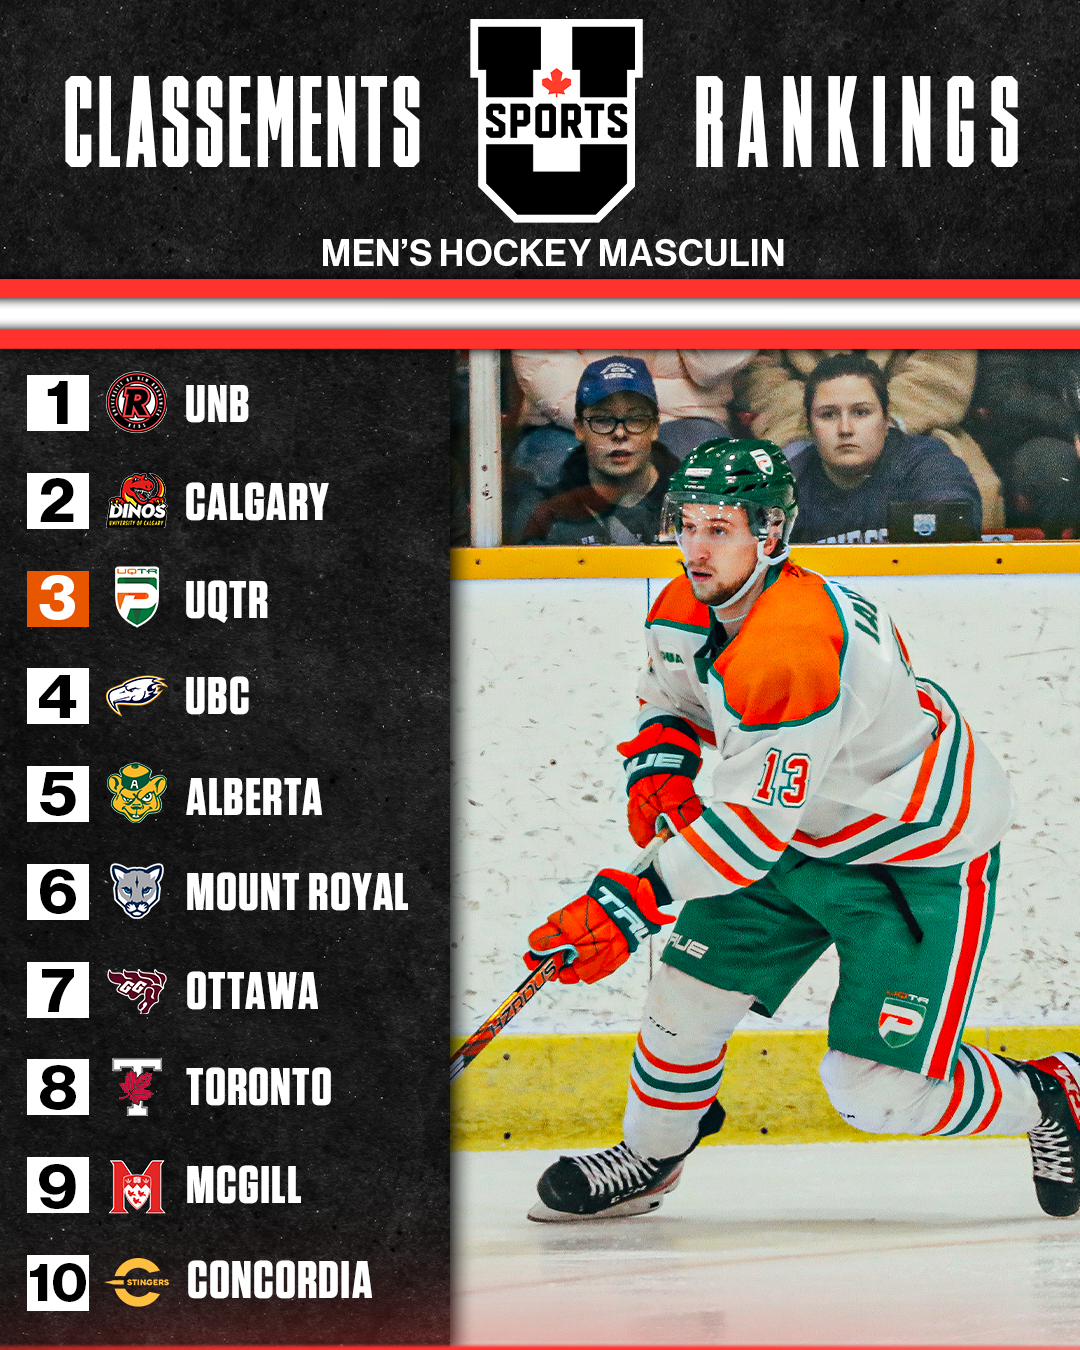 Top_10_MHKY.png (2.06 MB)